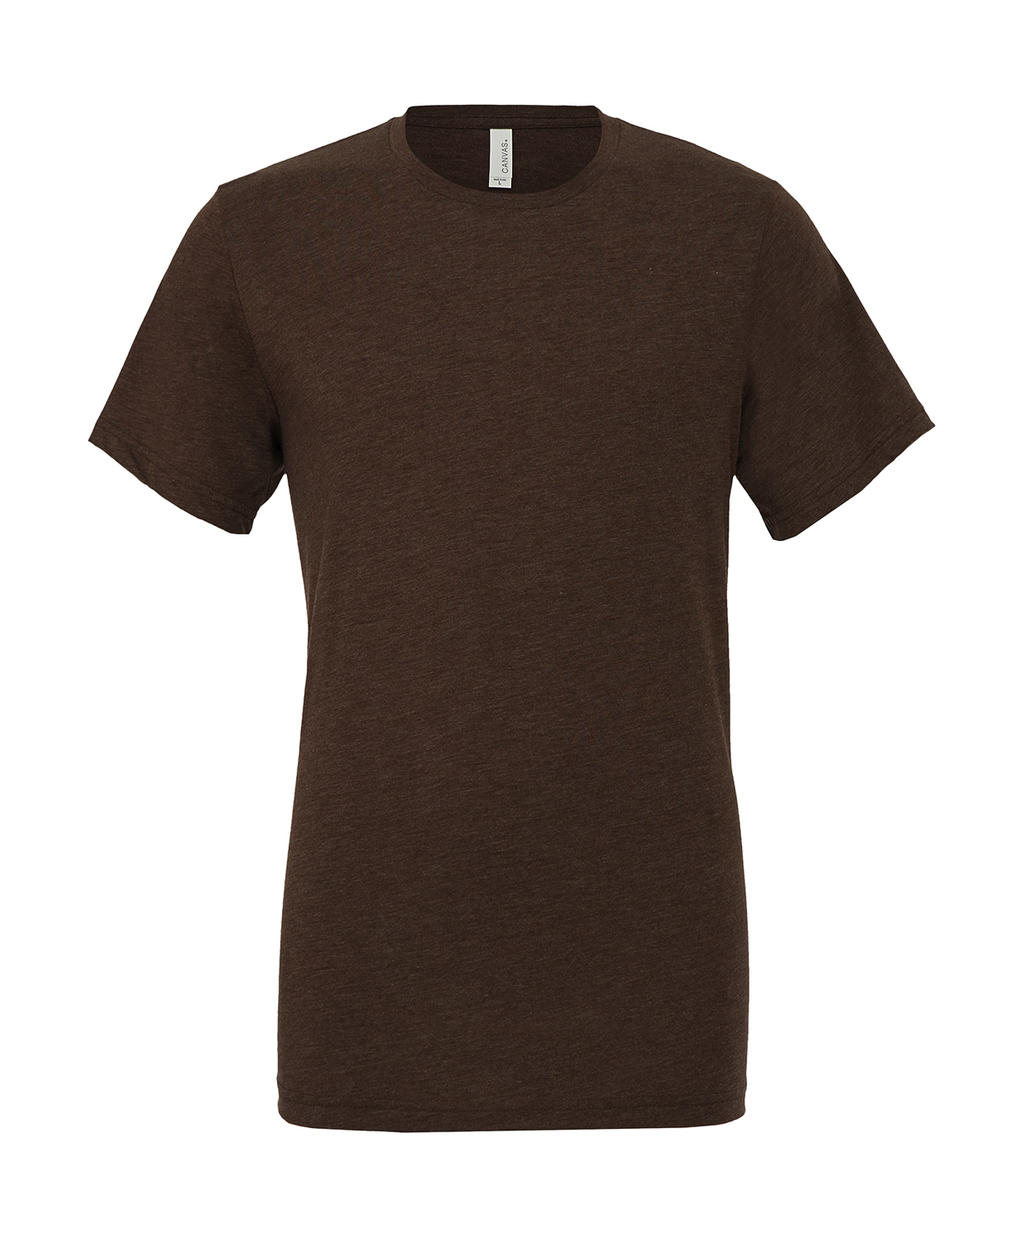  Unisex Triblend Short Sleeve Tee in Farbe Brown Triblend